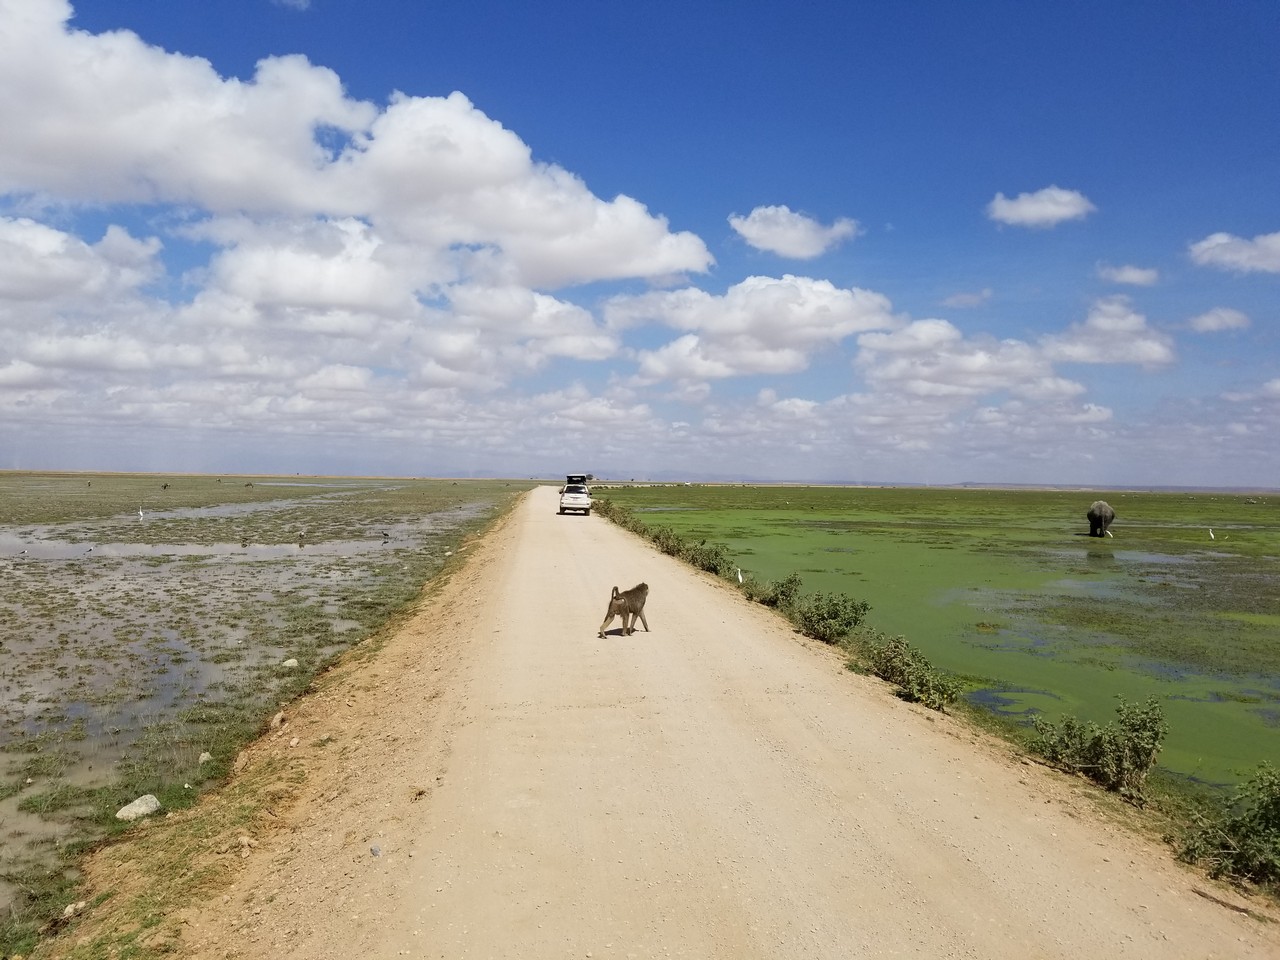 a dog walking on a dirt road